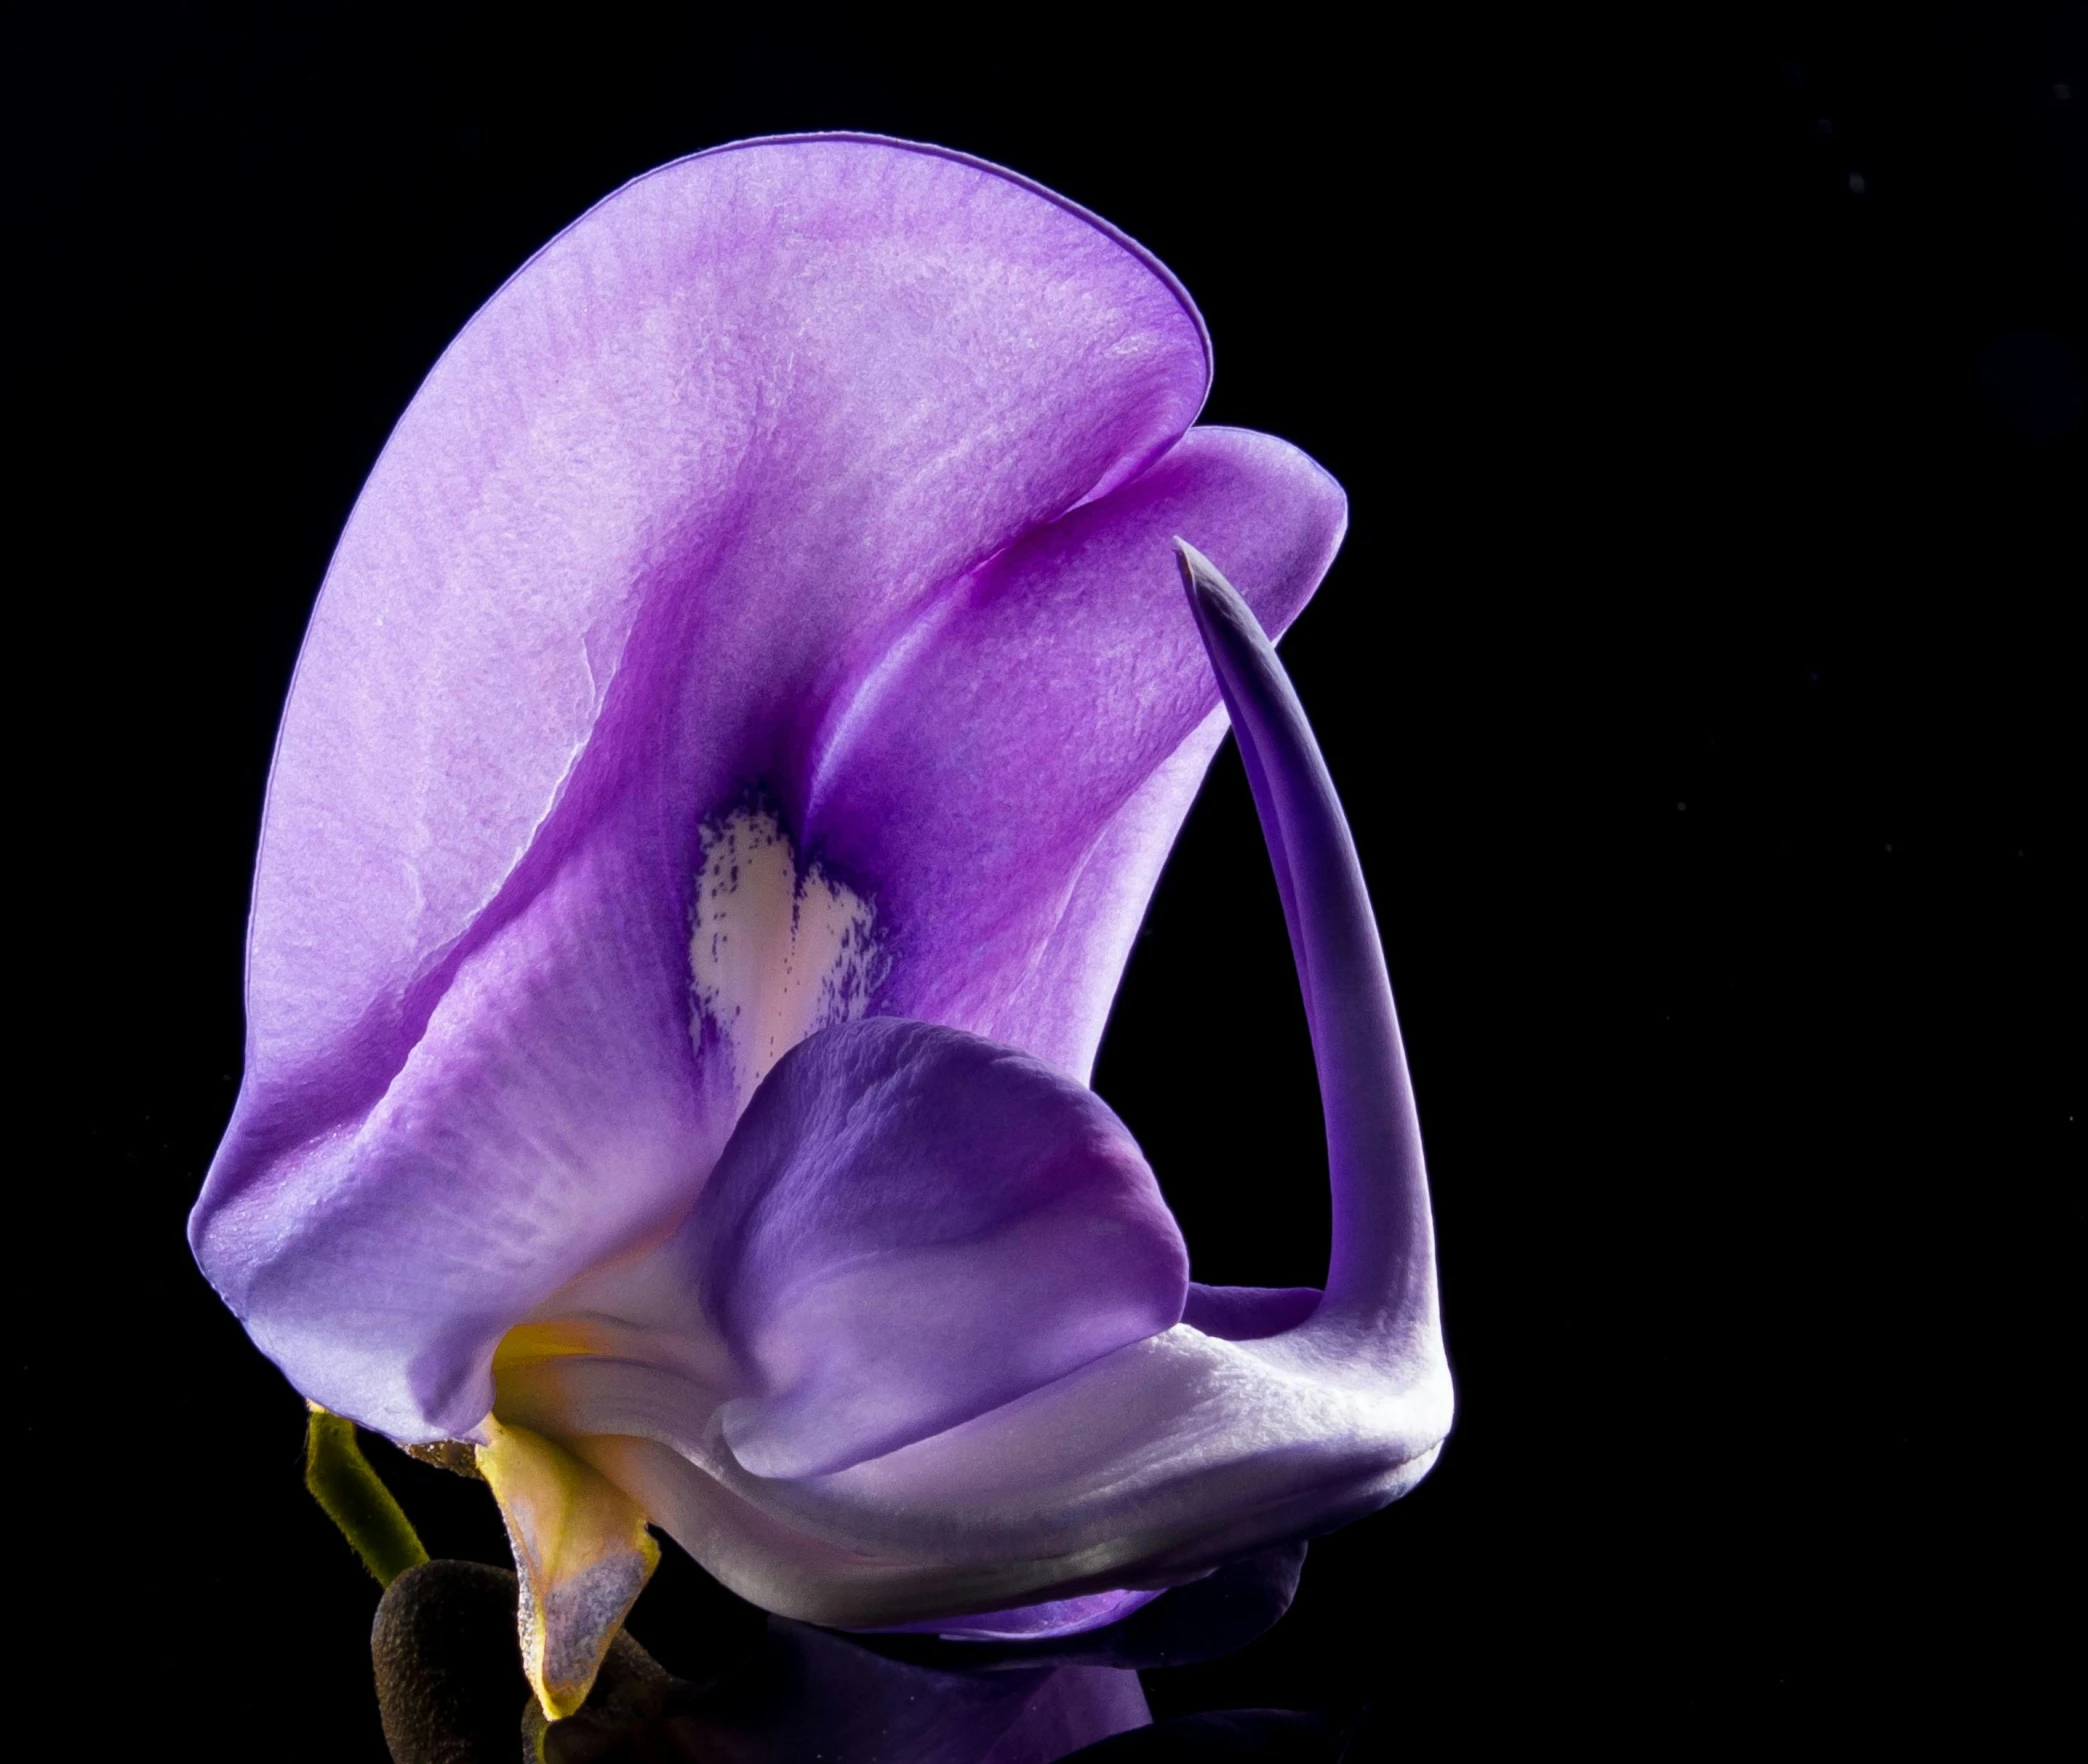 a purple flower sitting on top of a black surface, award-winning photograph, flower sepals forming helmet, contorted, verner panton